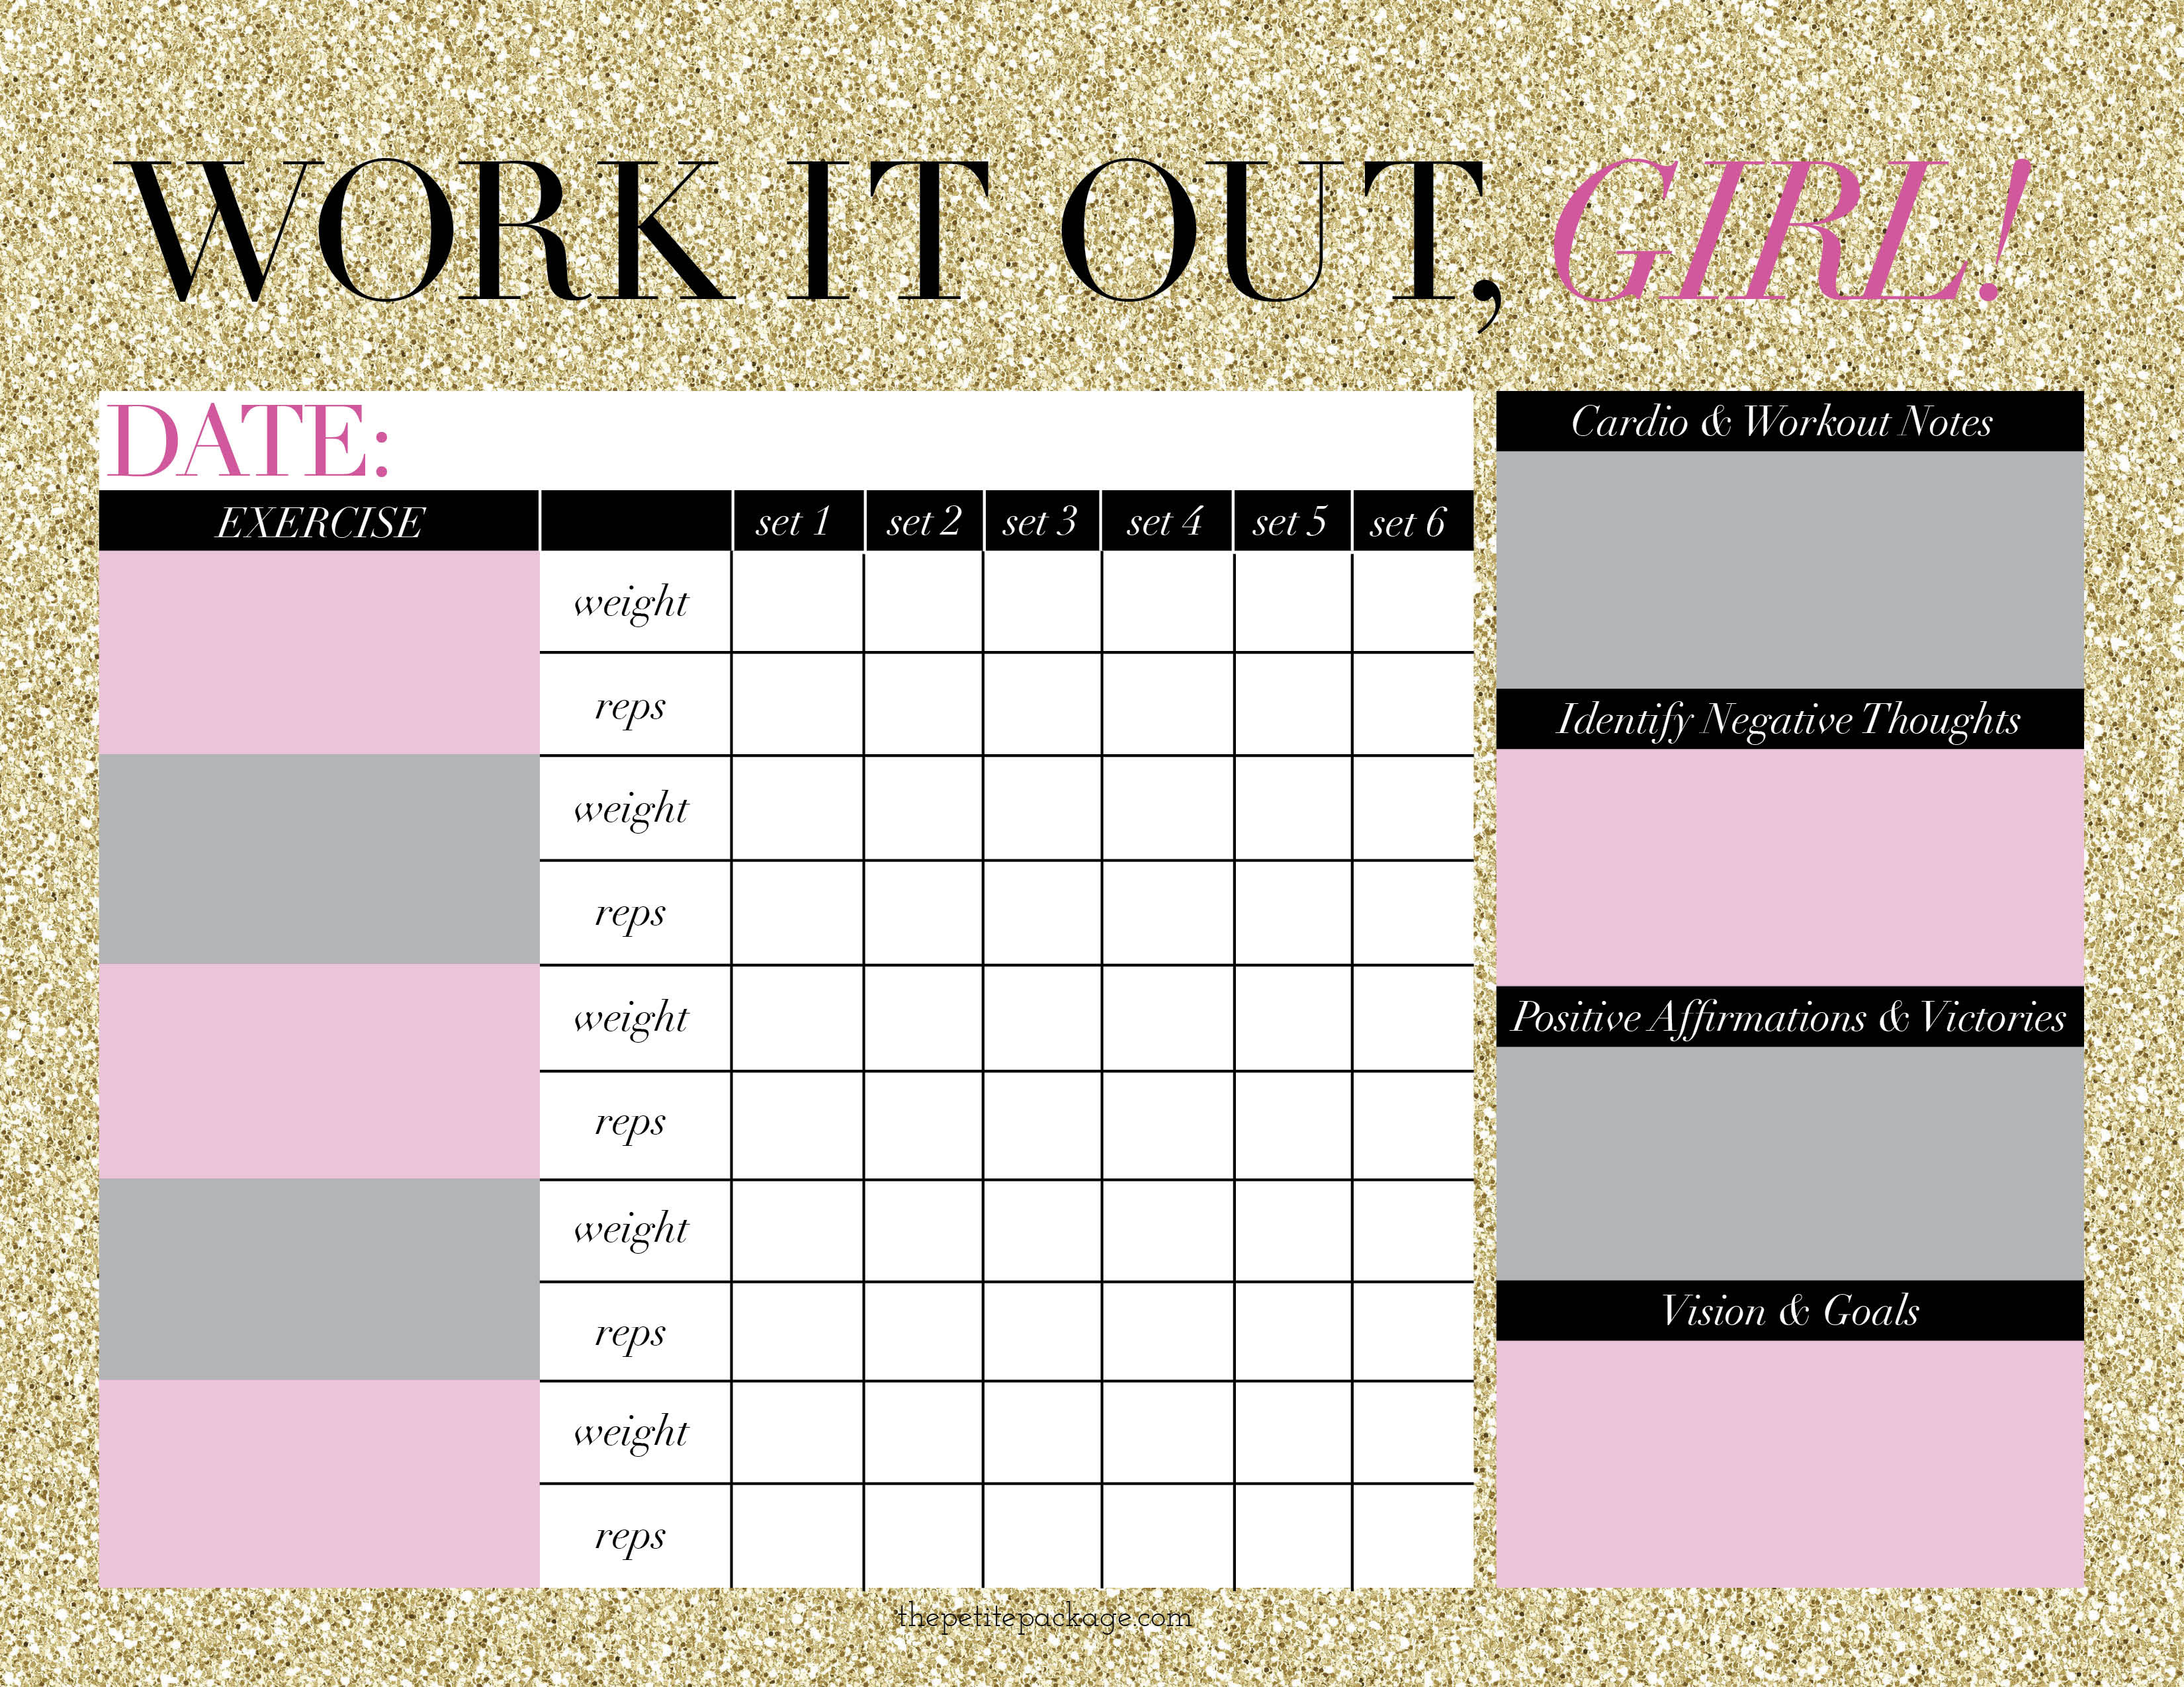 workout-routine-schedule-template